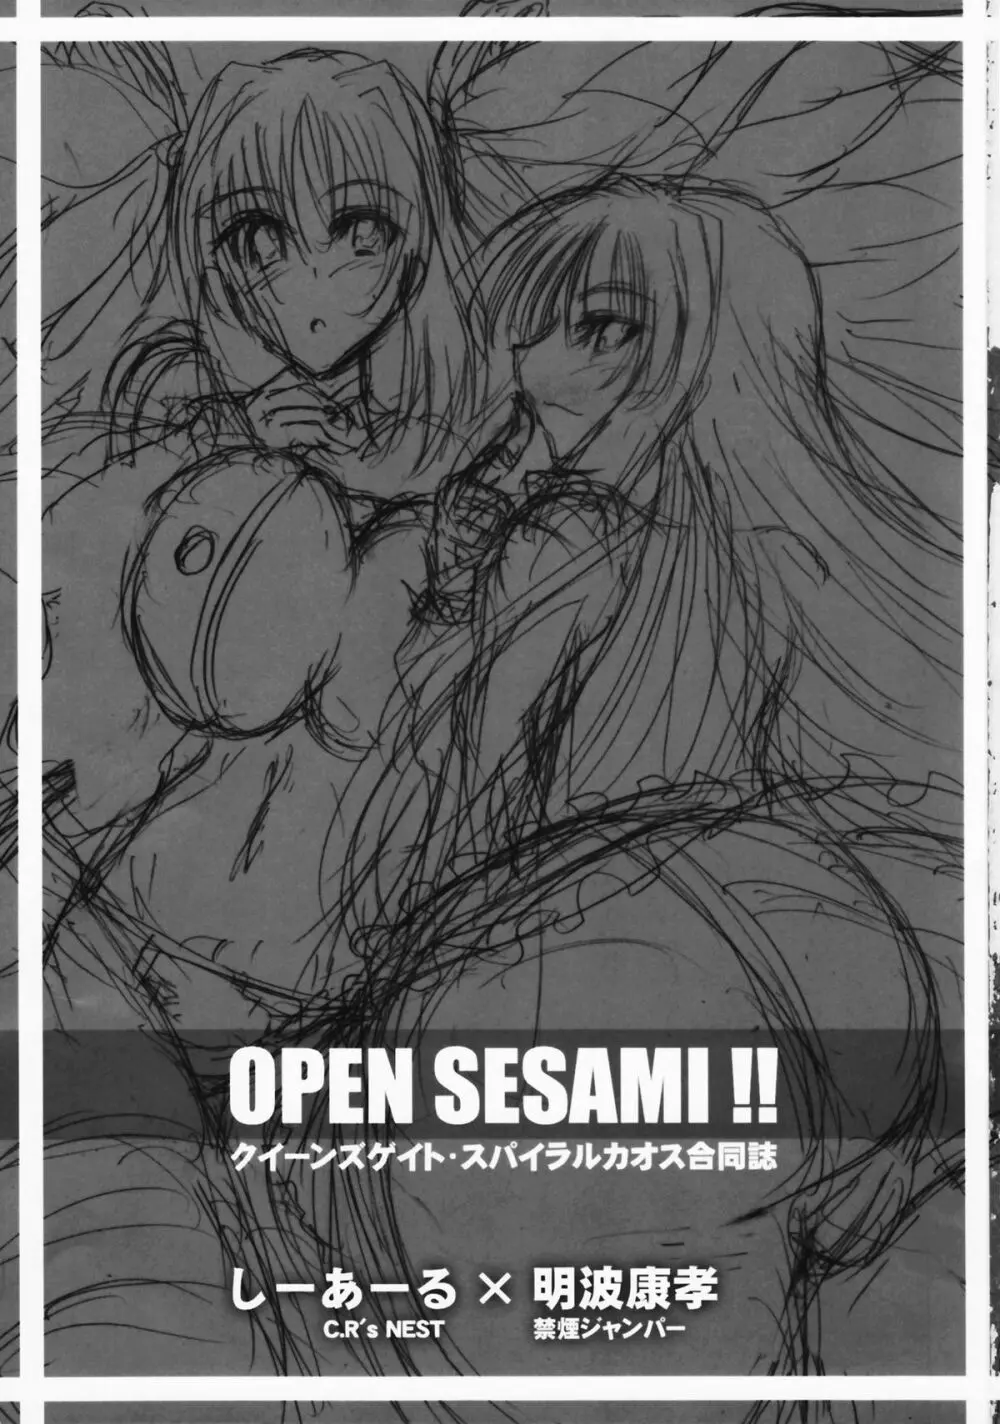 OPEN SESAMI!! - page3